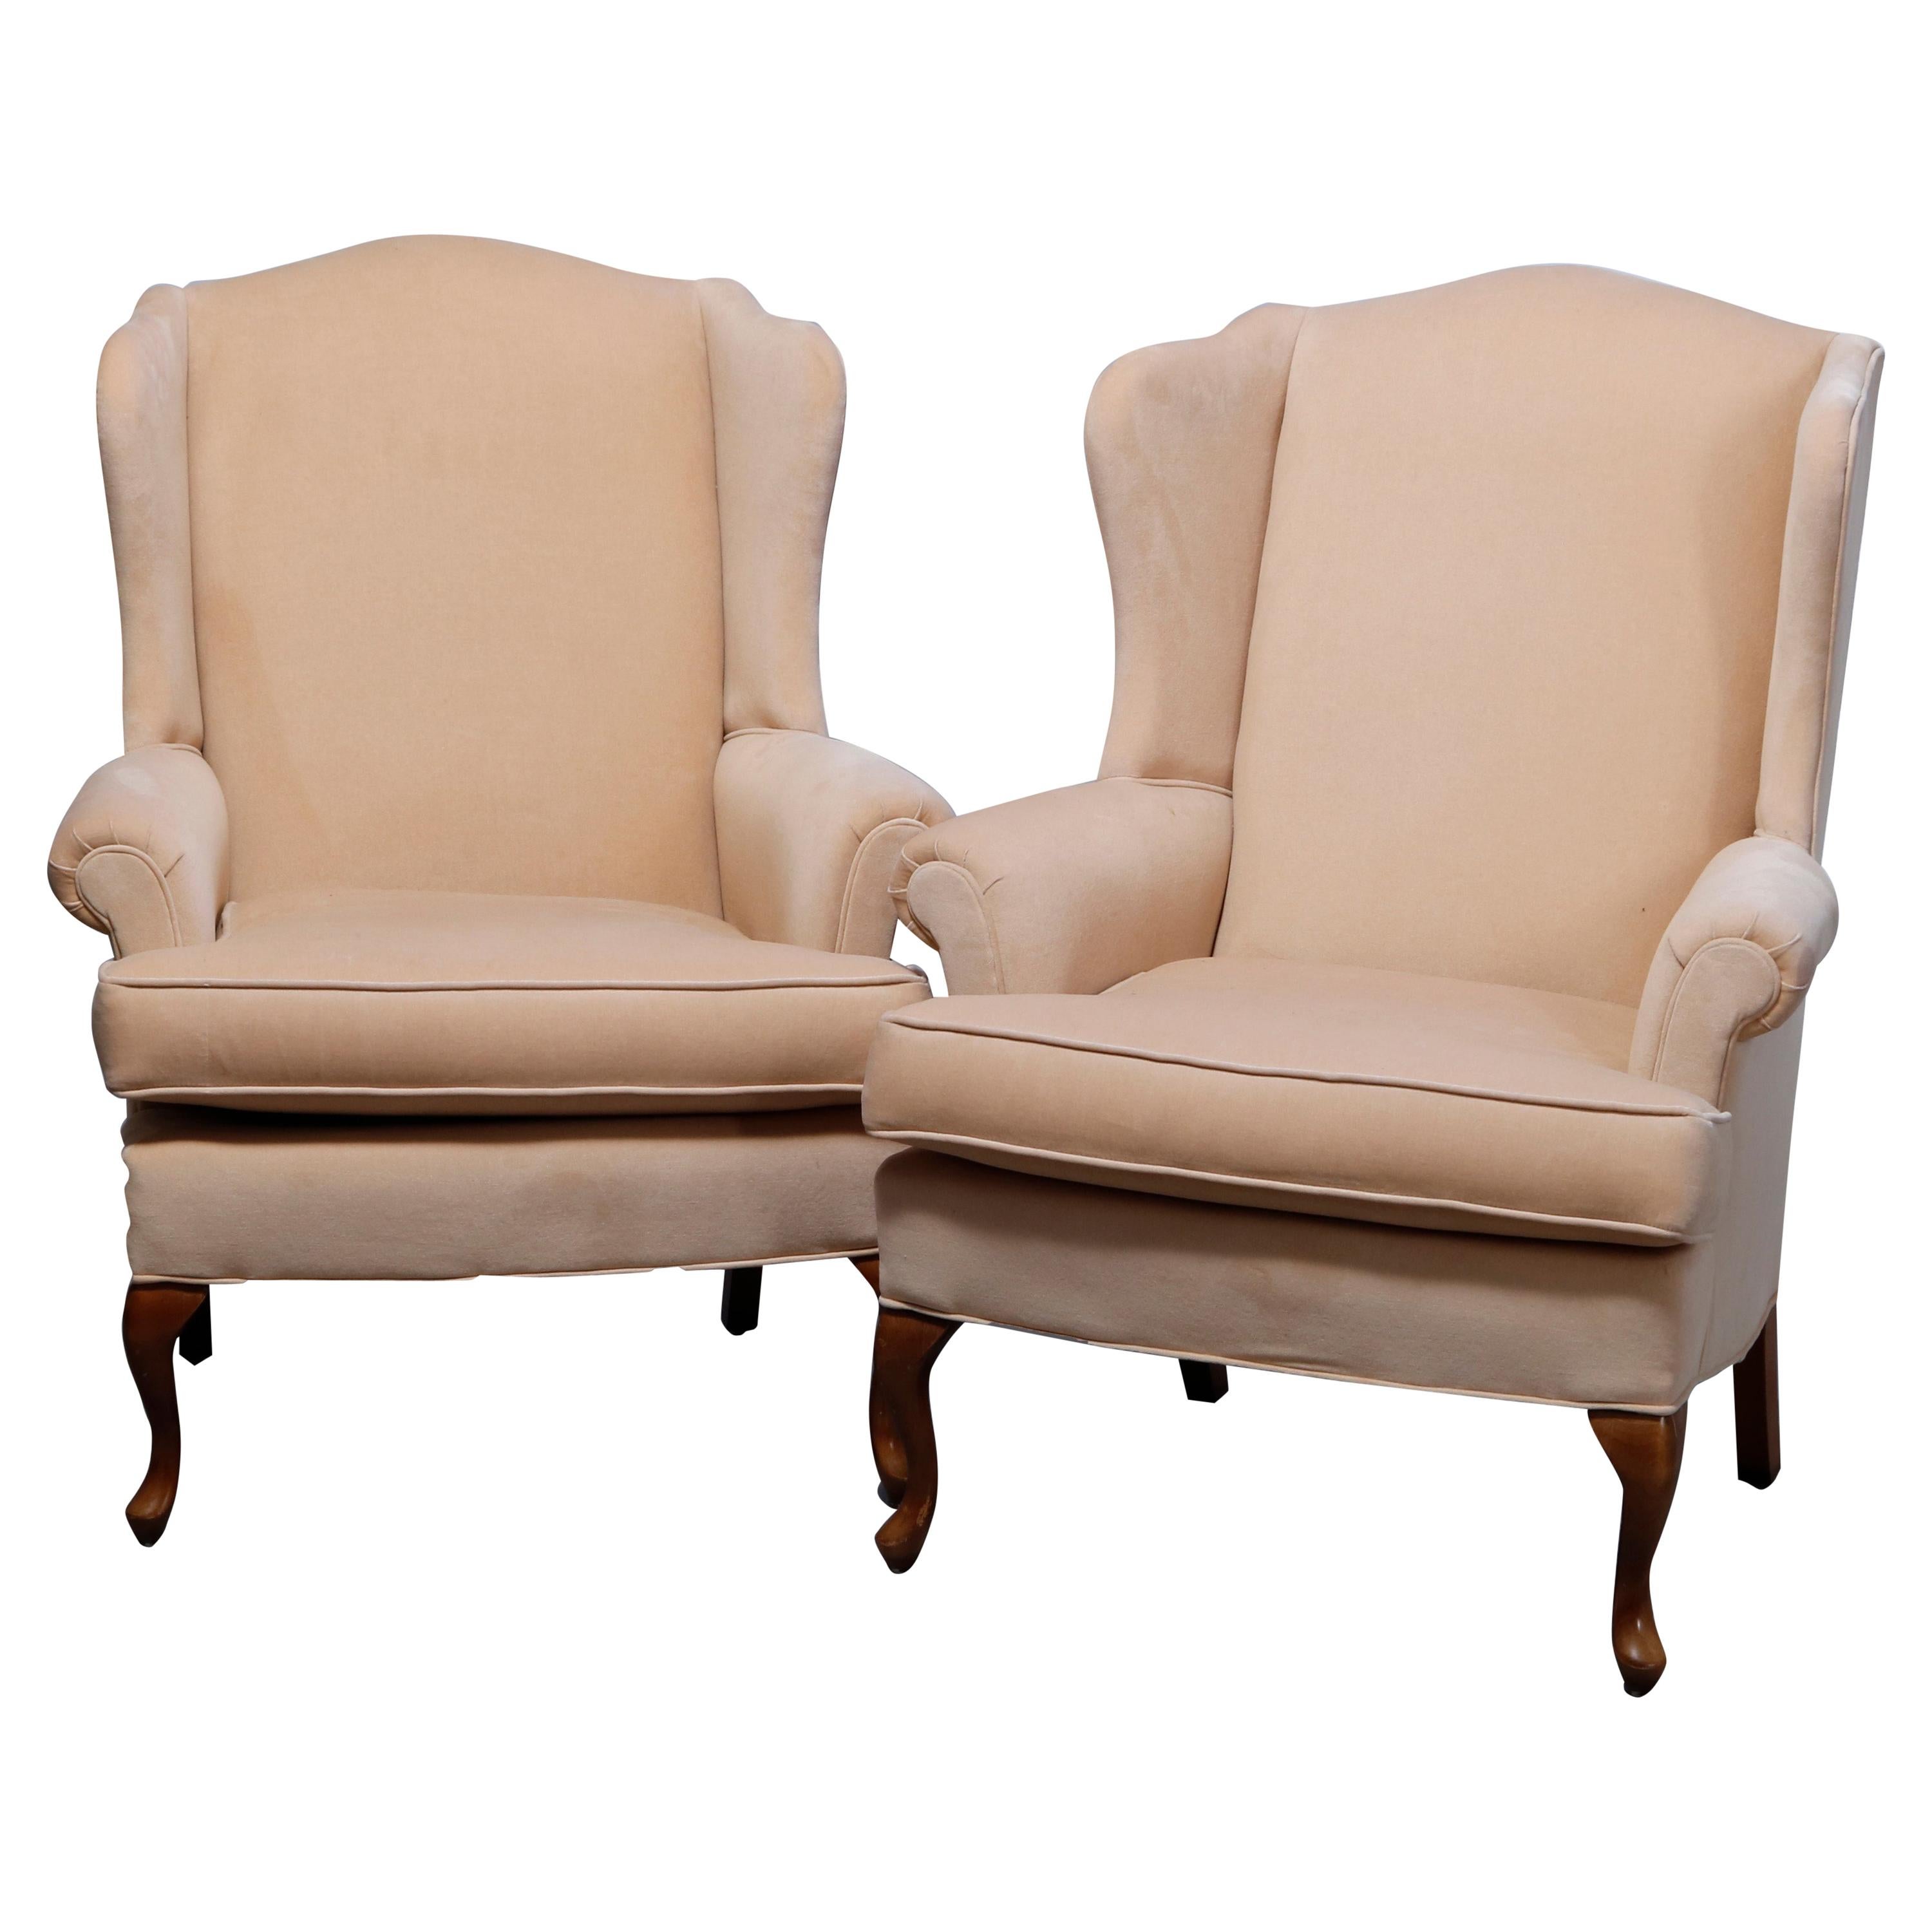 Pair of Pennsylvania House Queen Anne Style Wingback Armchairs, 20th C